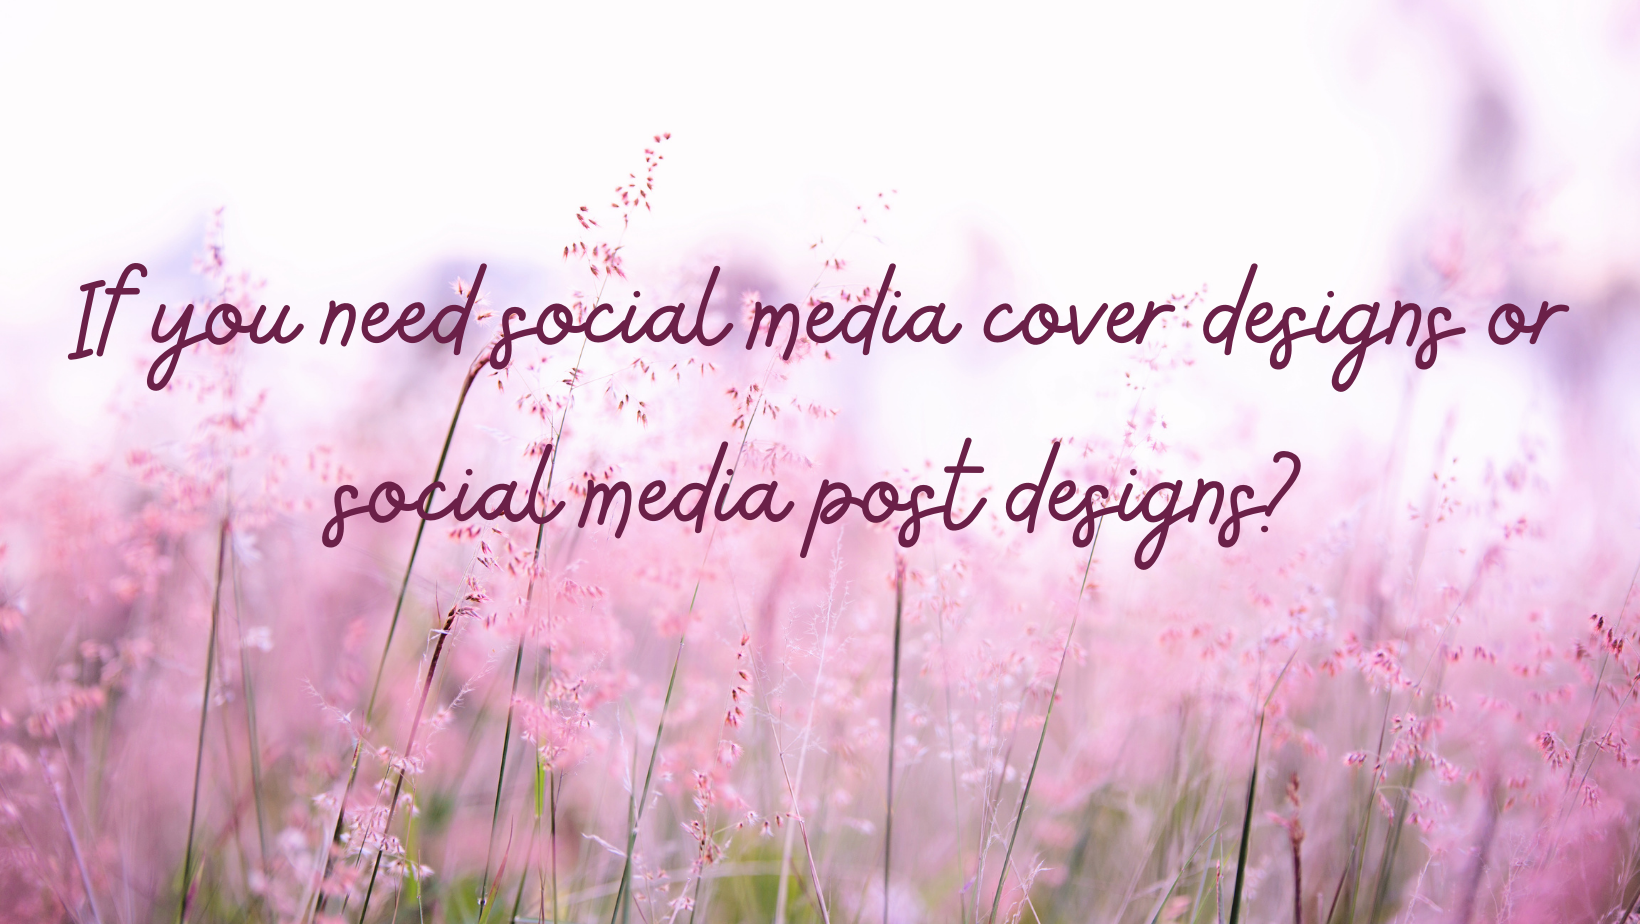 I will design an eye catching social media covers and post.